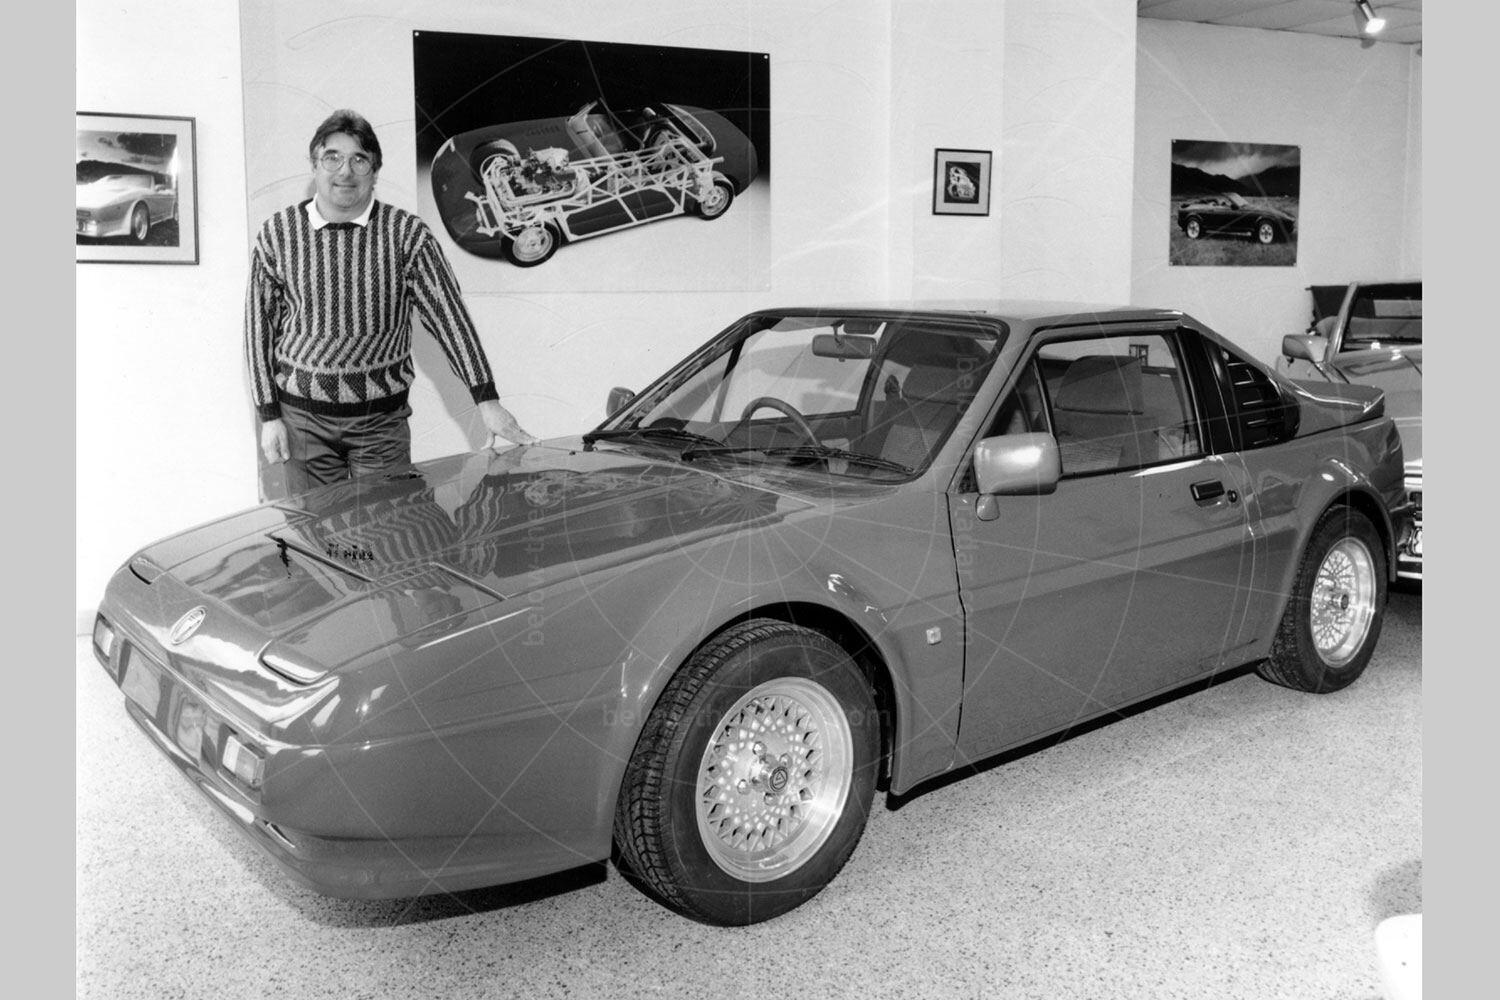 David Haughin was the first official Ginetta dealer, here with a G32 1.9 Pic: magiccarpics.co.uk | David Haughin was the first official Ginetta dealer, here with a G32 1.9